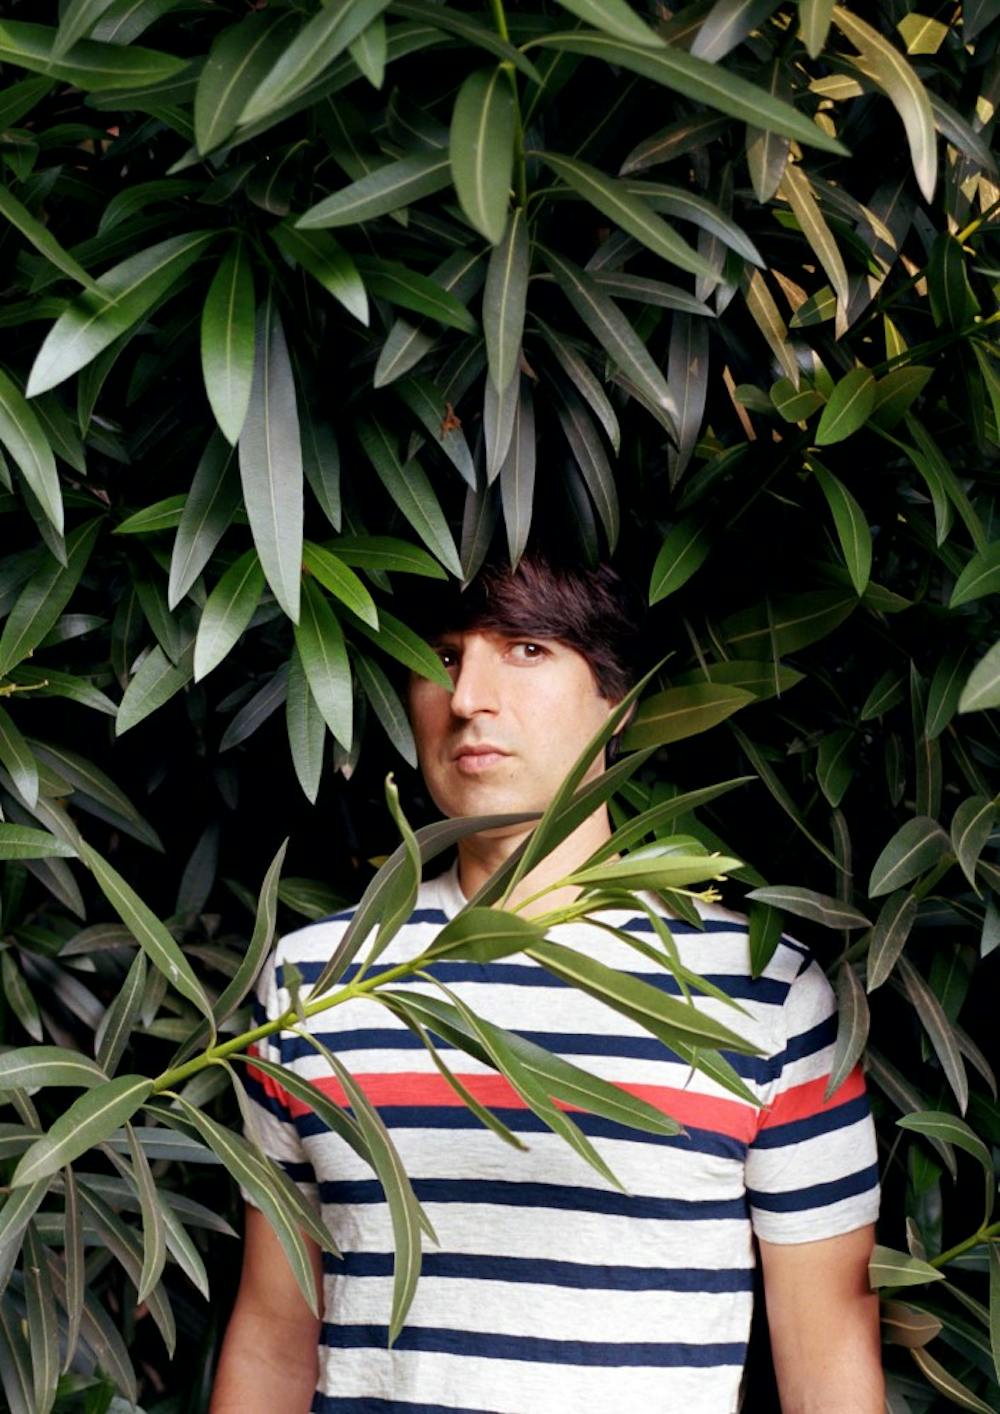 <p>Comedian Demetri Martin cracked jokes and made music on-stage at the Center for the Arts on Saturday. Martin, alongside opener Erin Harkes, performed as part of the latest stop on the "Let's Get Awkward" tour.</p>